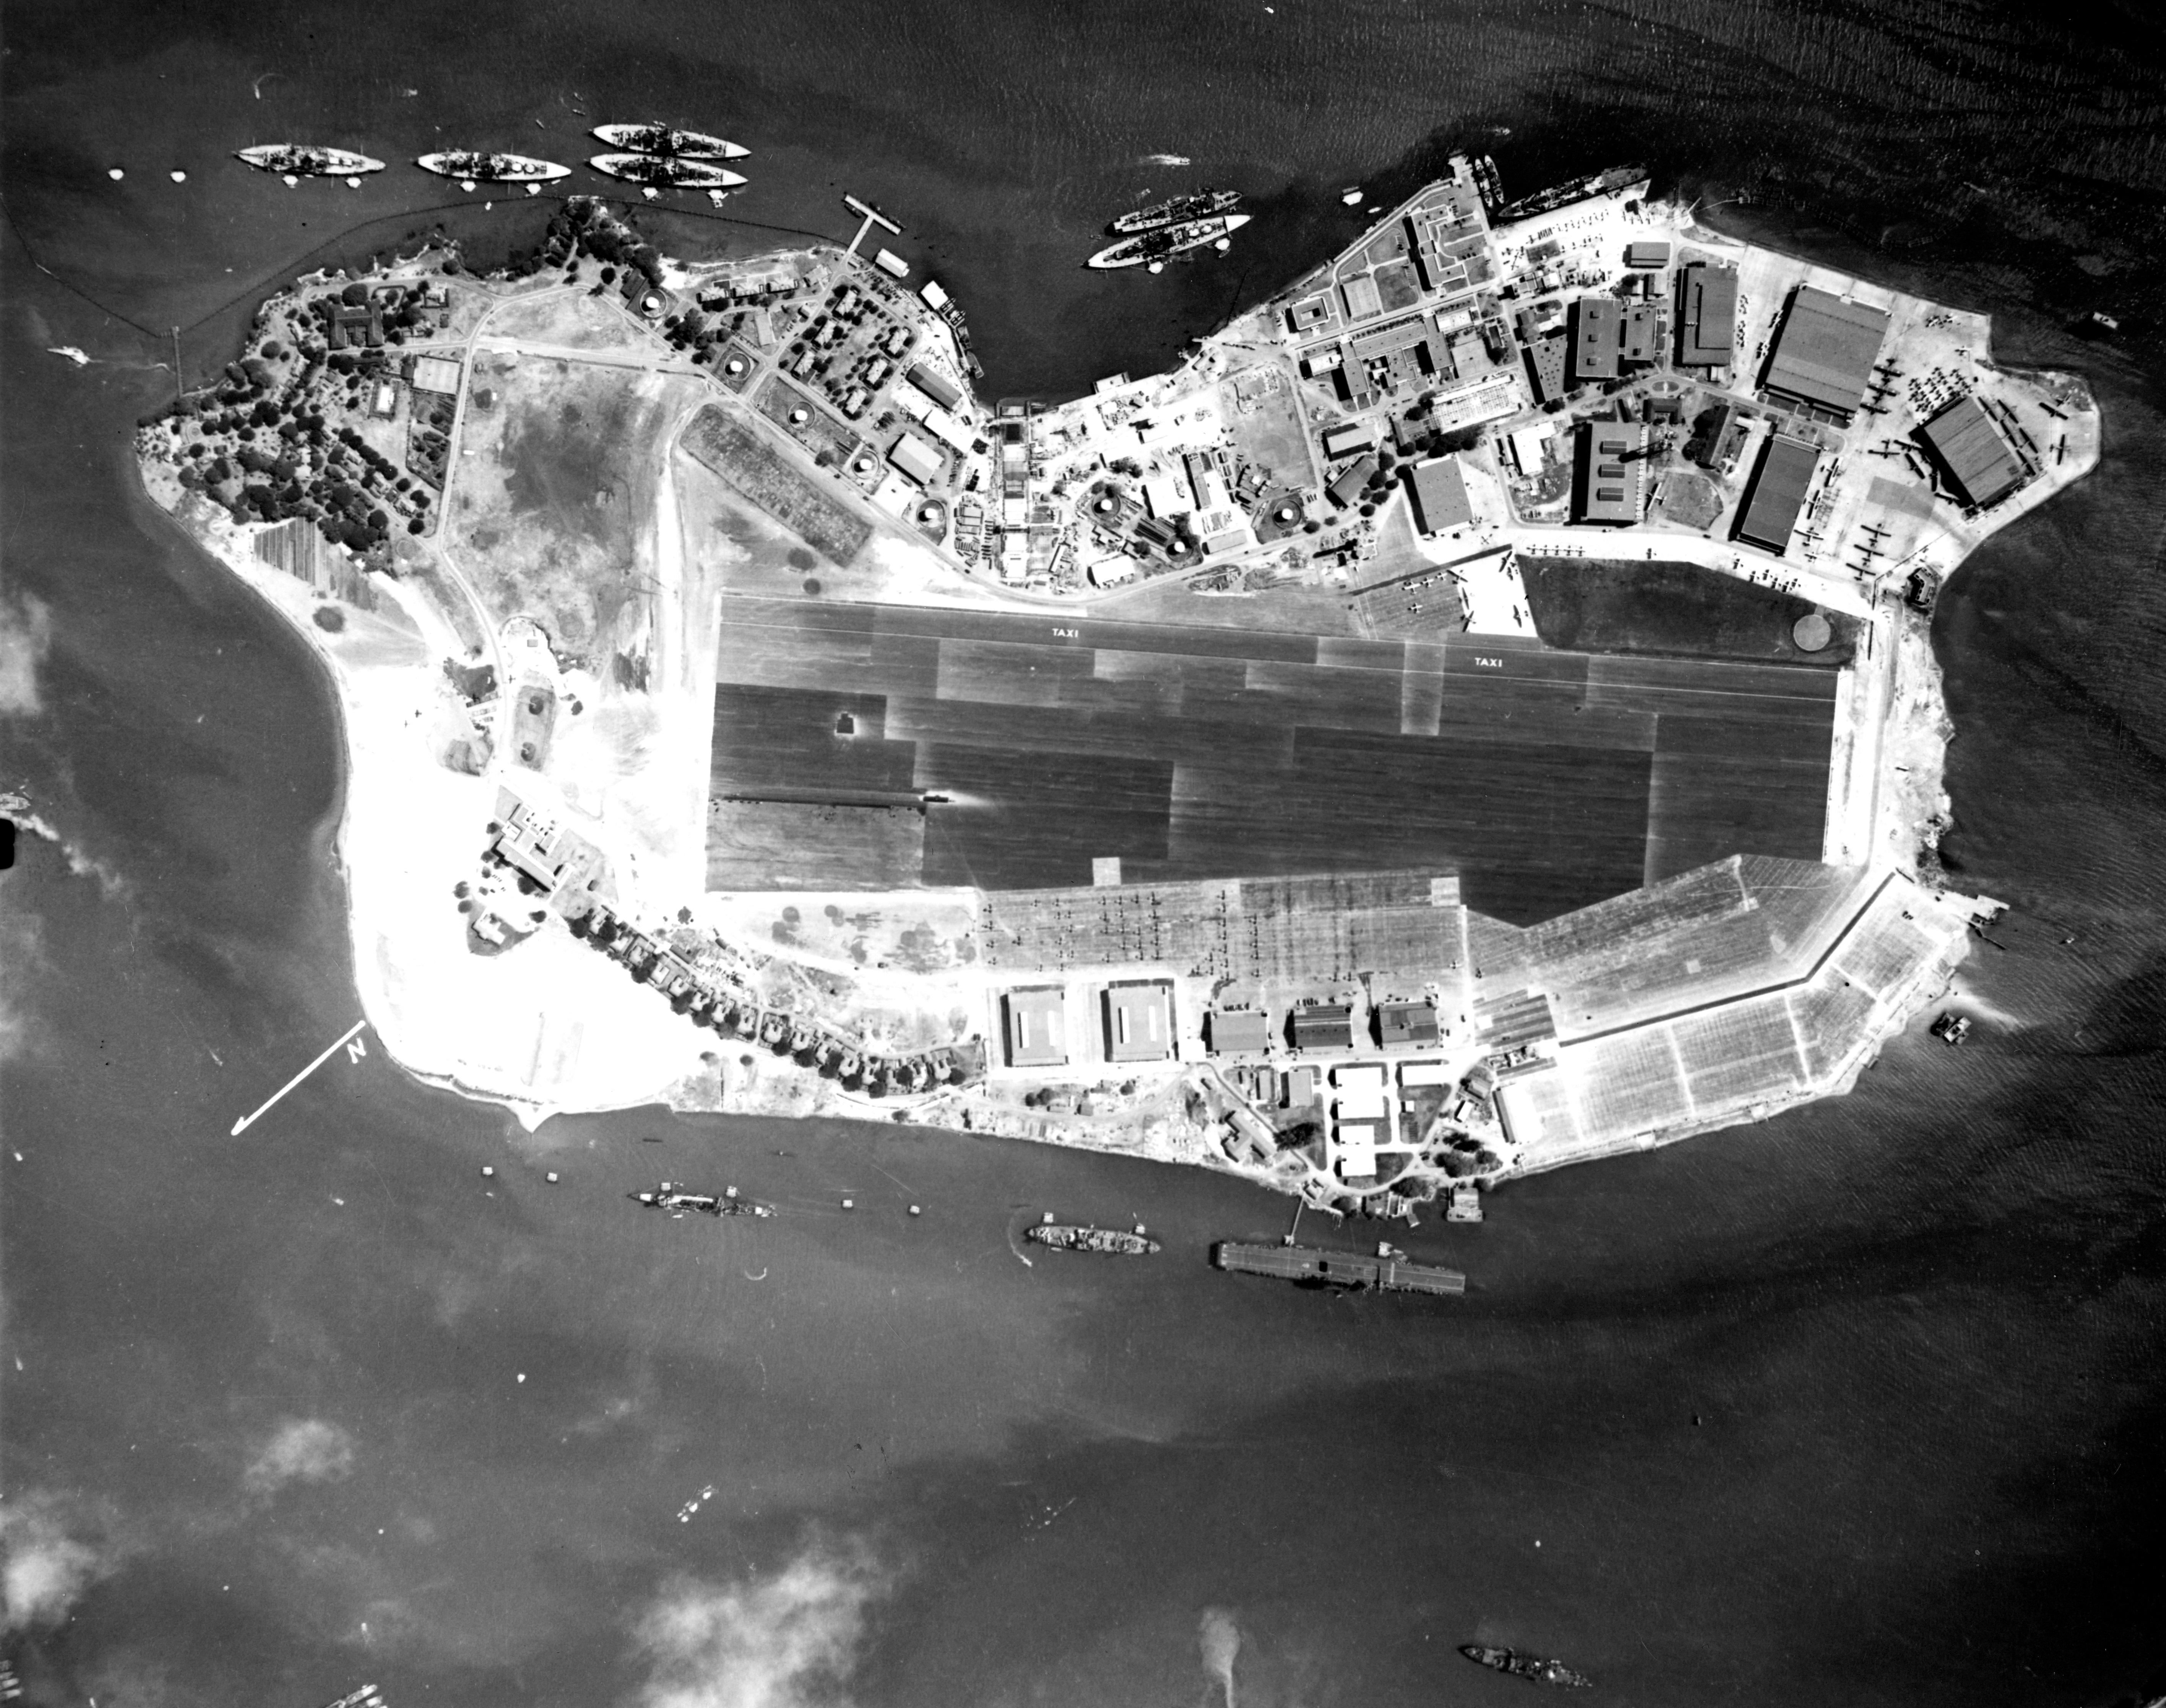 Vertical aerial photograph of Ford Island, Pearl Harbor, US Territory of Hawaii, 10 Nov 1941; note Battleship Row on top, USS Lexington at bottom, and PBY aircraft at upper right